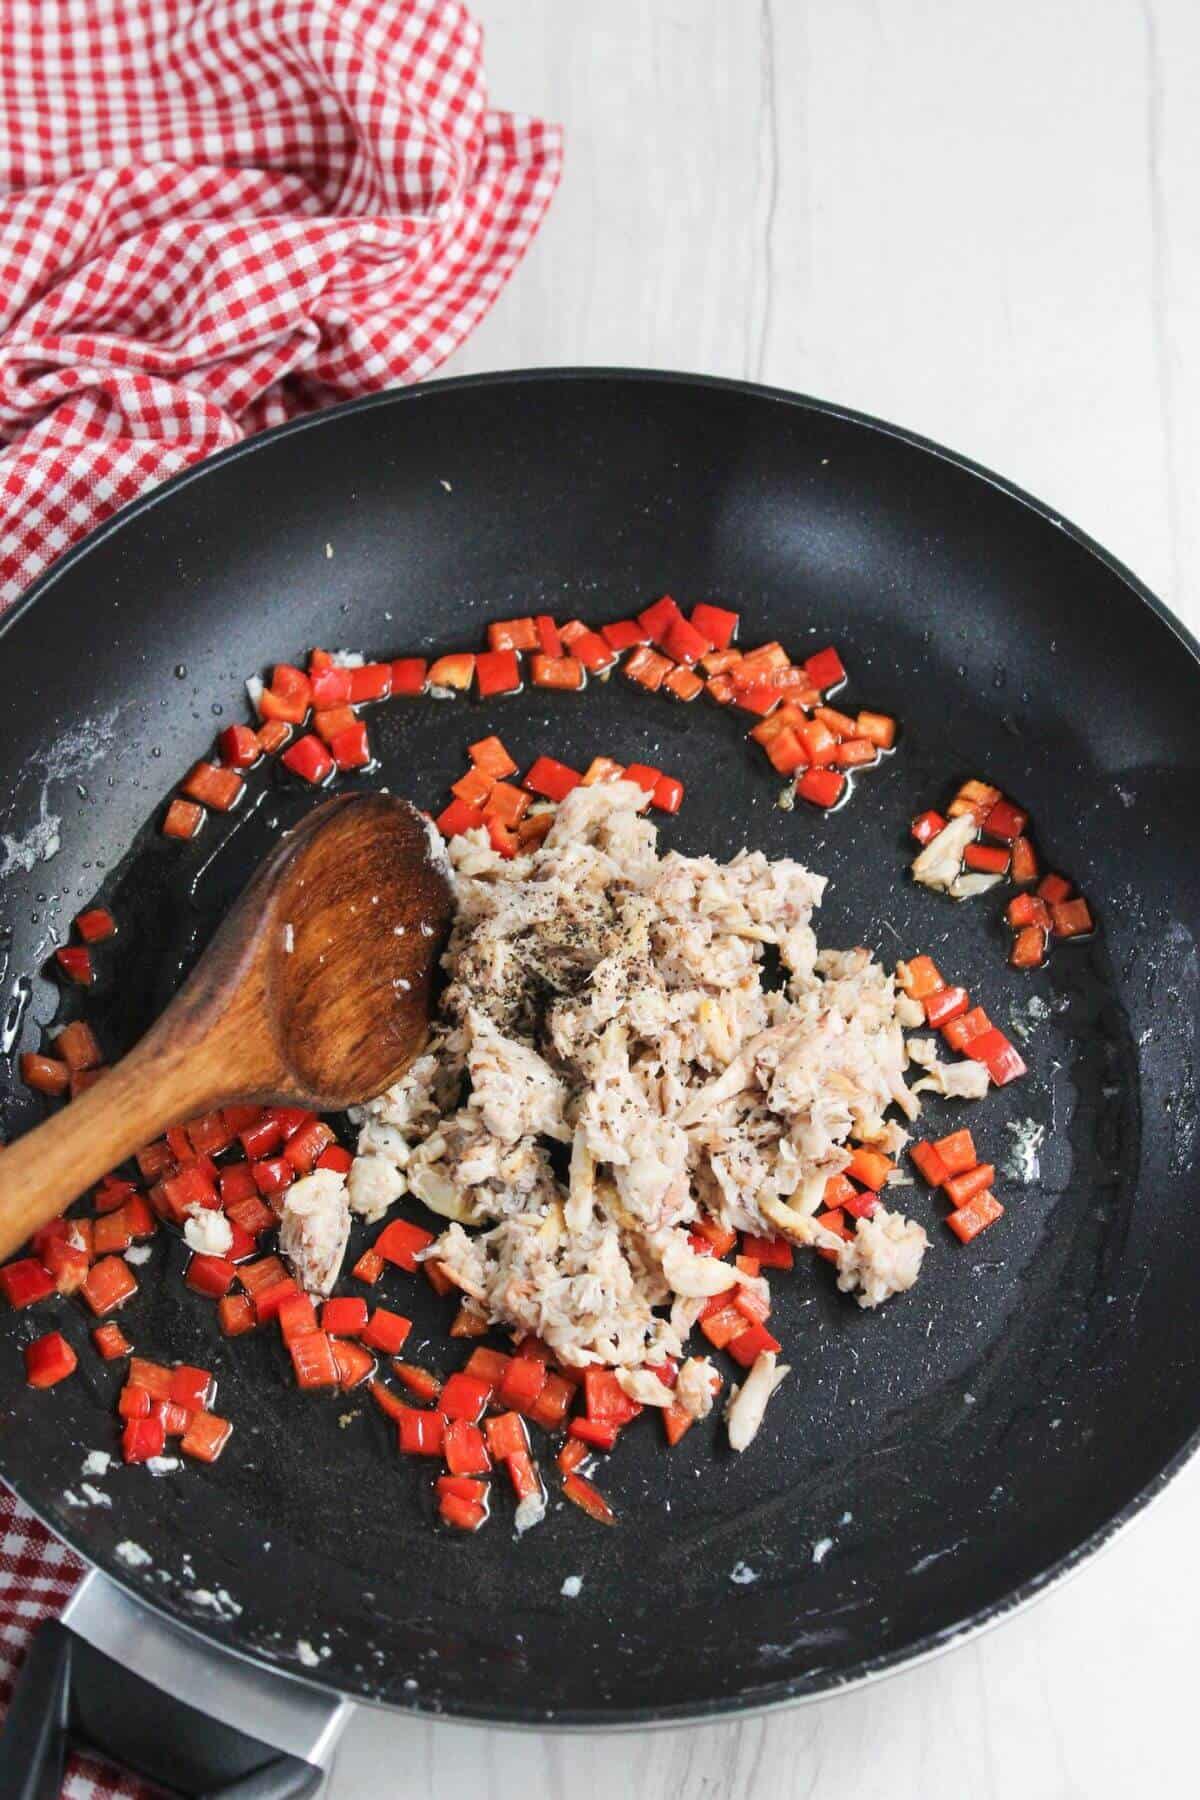 A frying pan with chopped vegetables and crab meat.